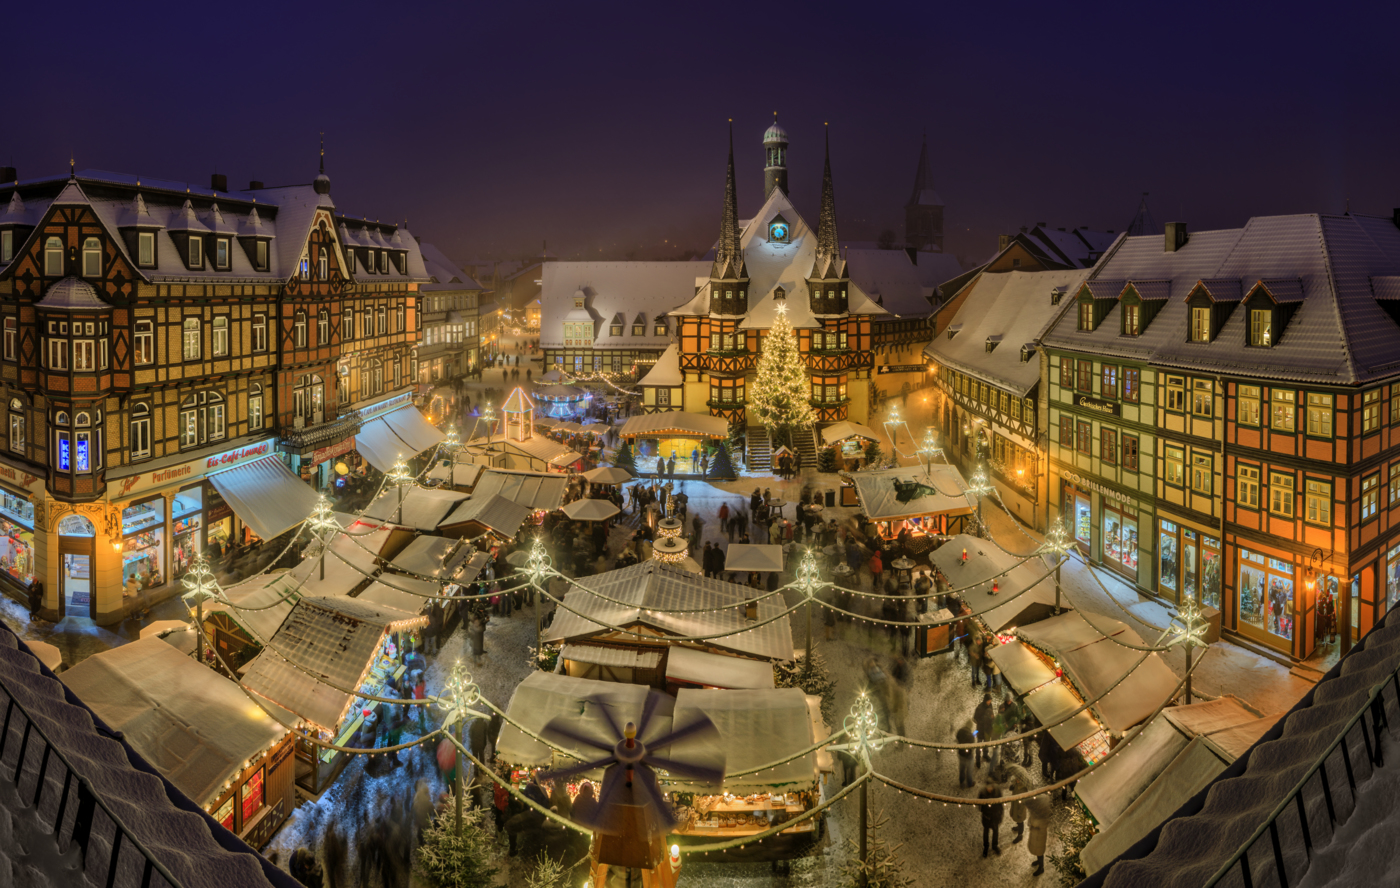 What to Know About Visiting European Christmas Markets - Tenon Tours